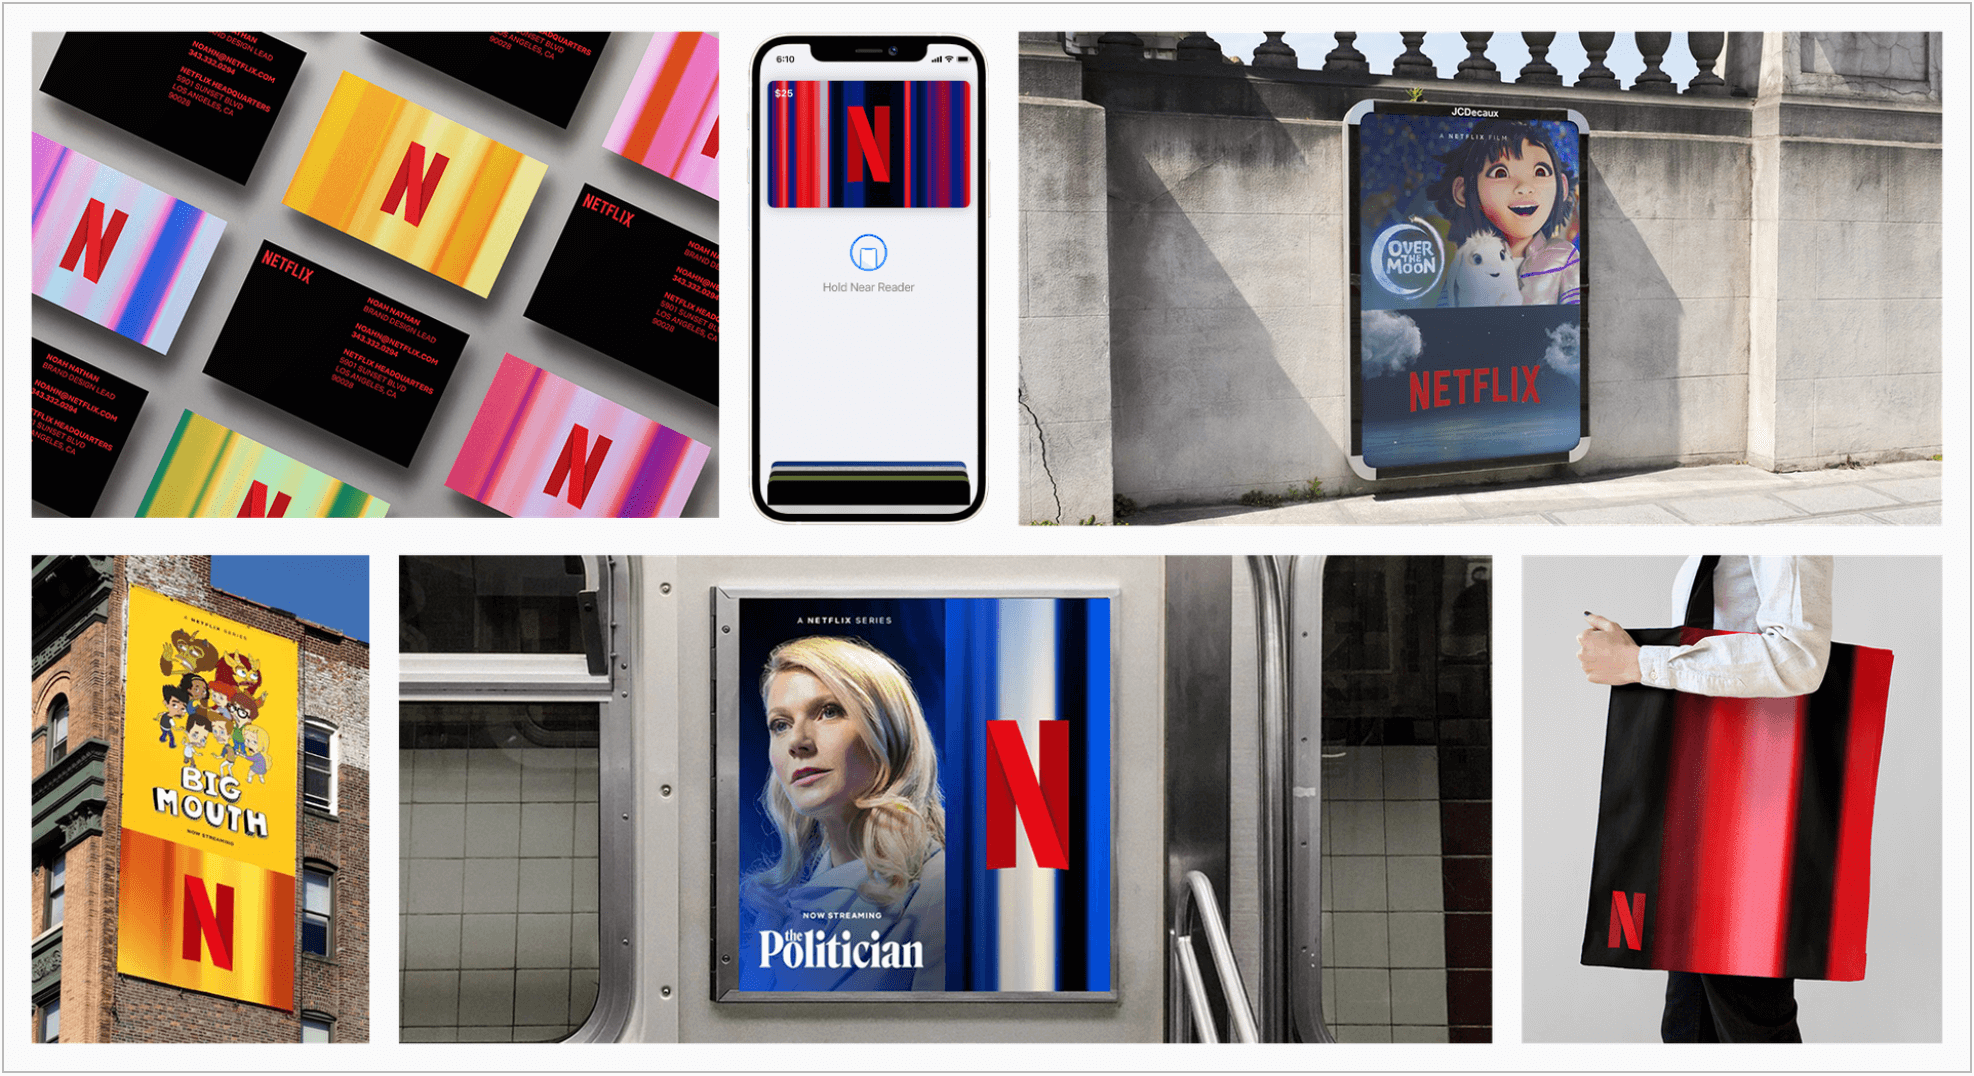 Examples of Netflix logo use including on business cards, on an app, in ads, and on a tote bag